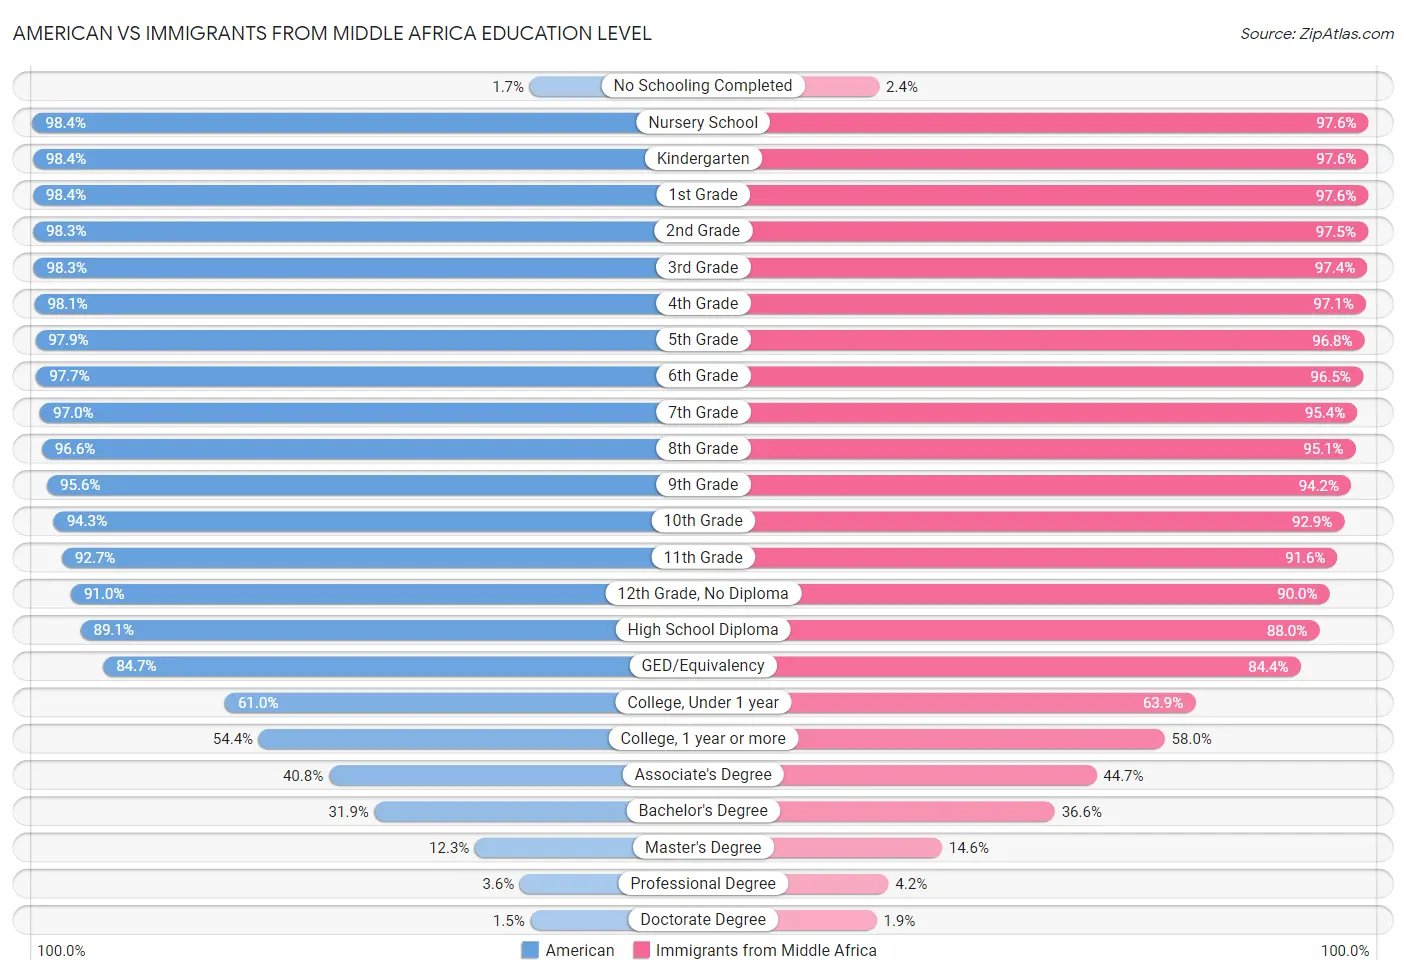 American vs Immigrants from Middle Africa Education Level